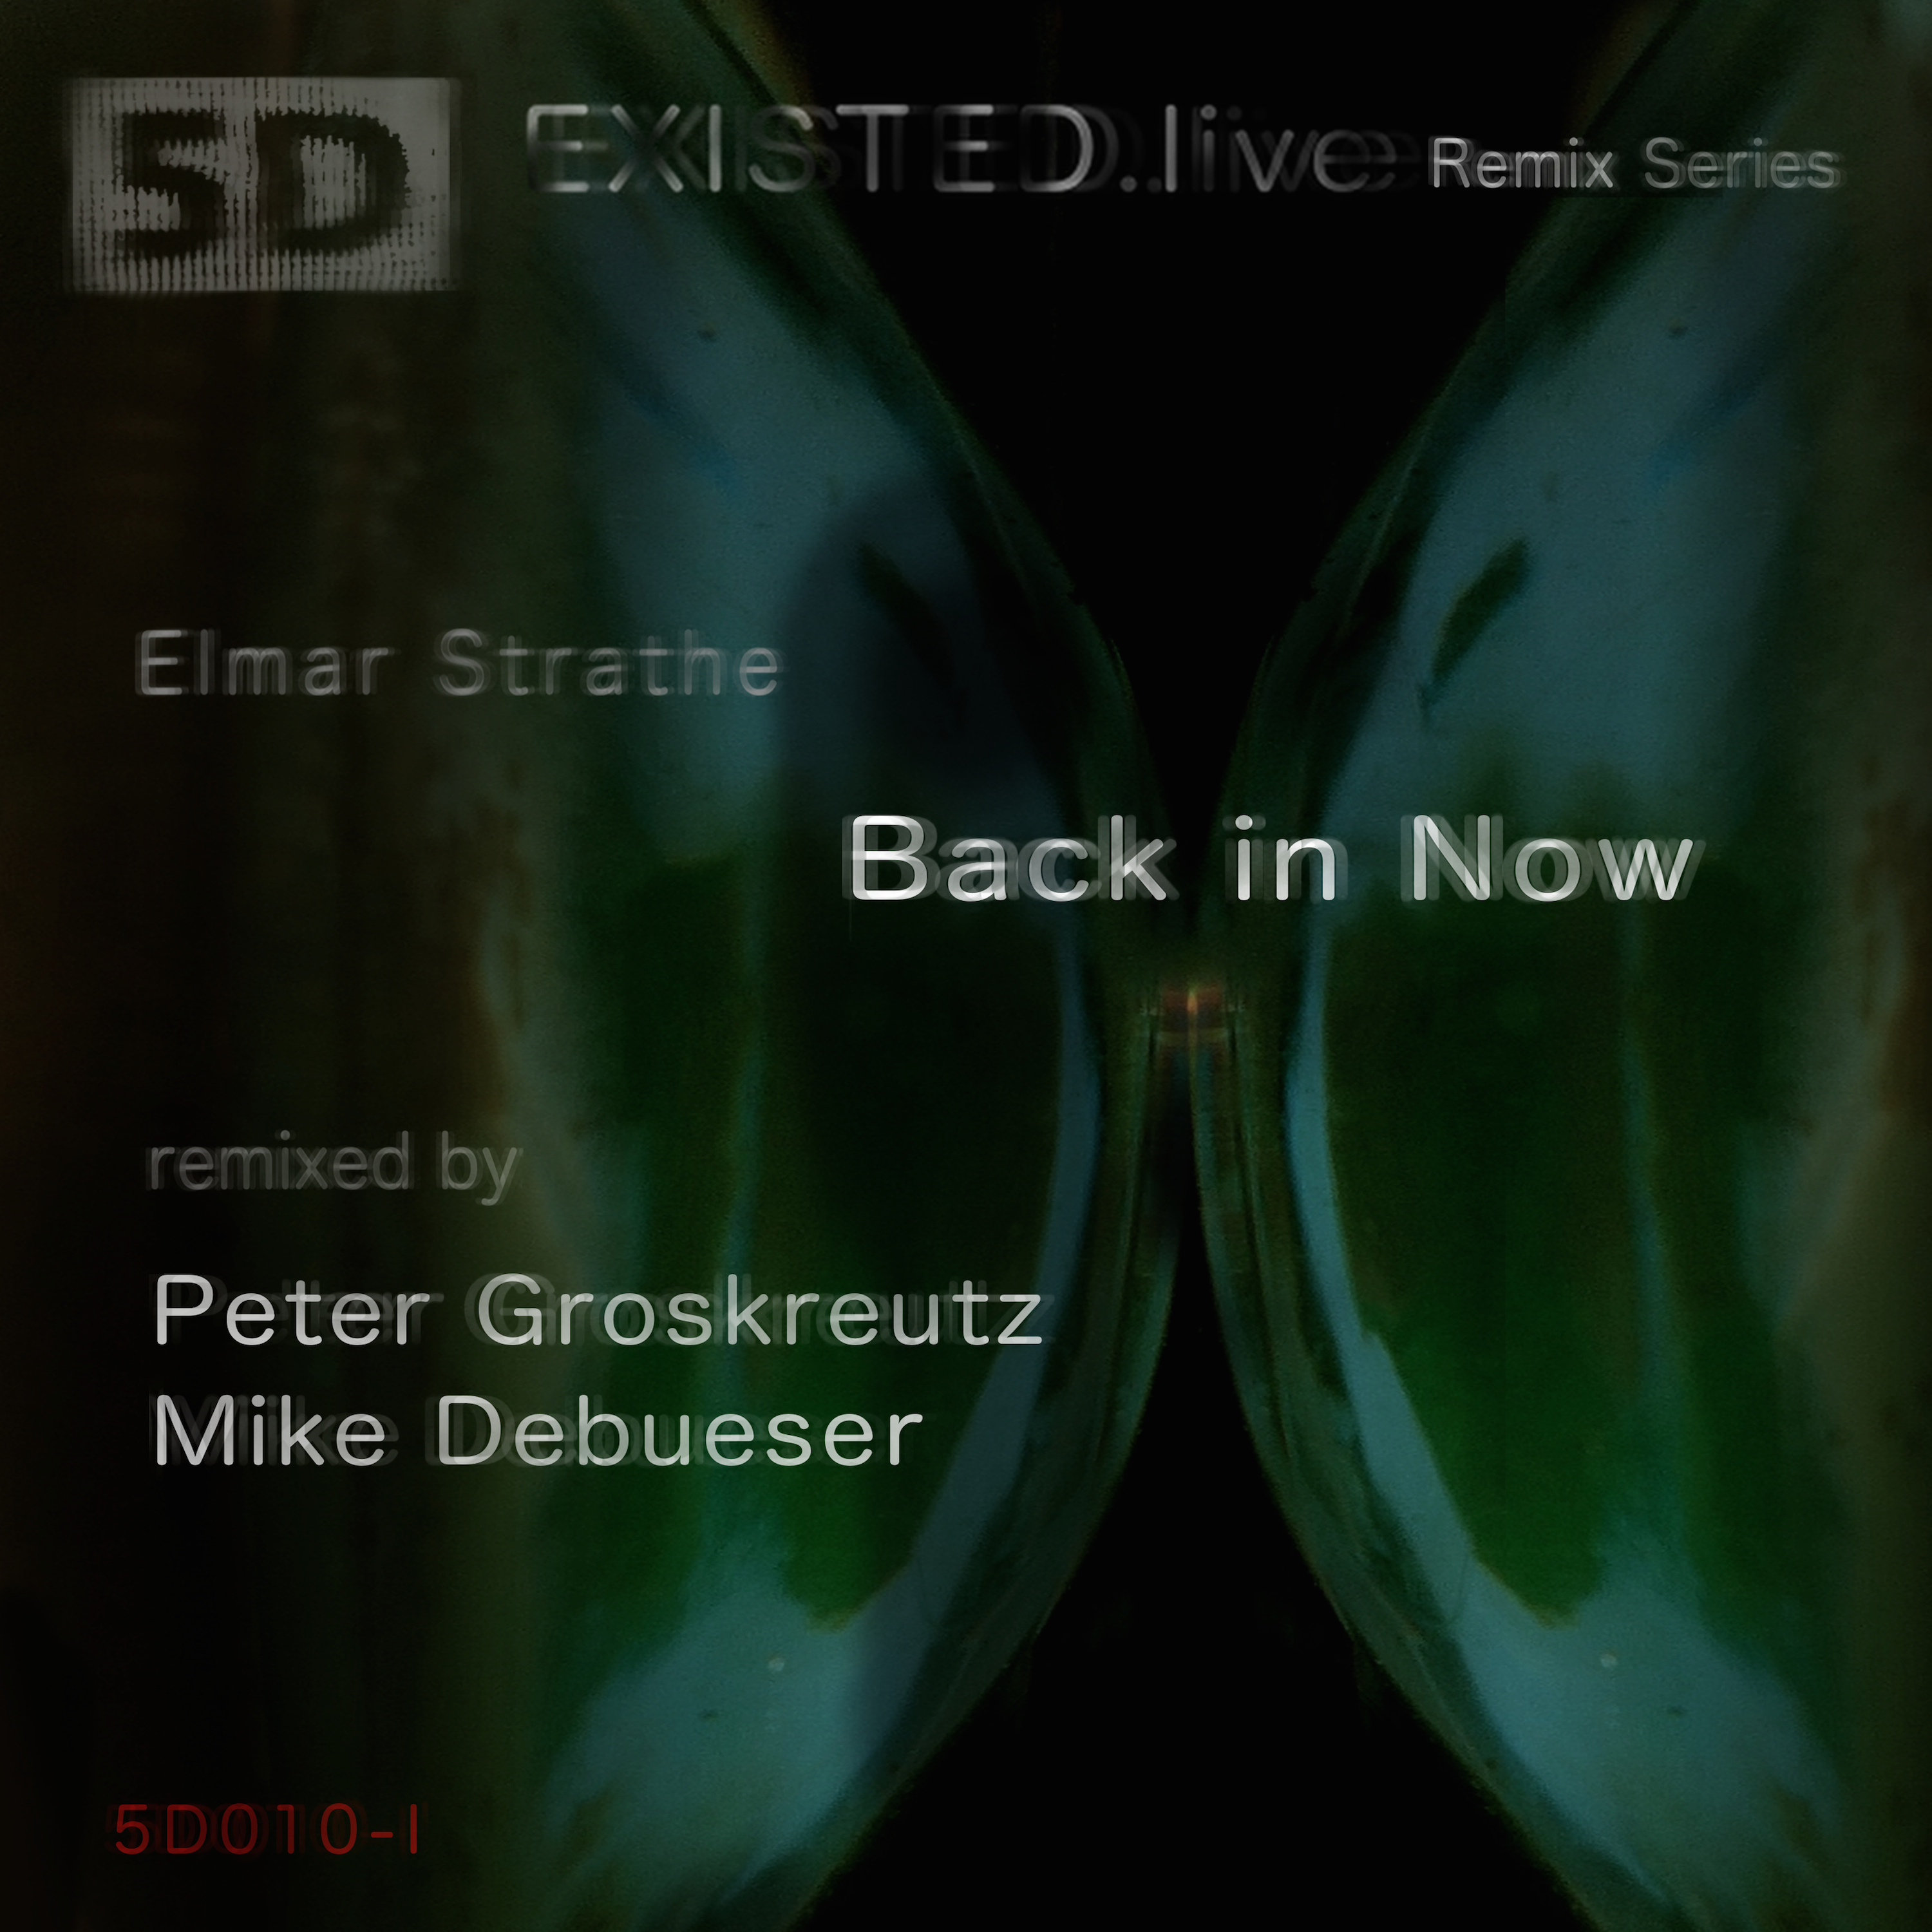 Back in Now (Mike Debueser Remix)